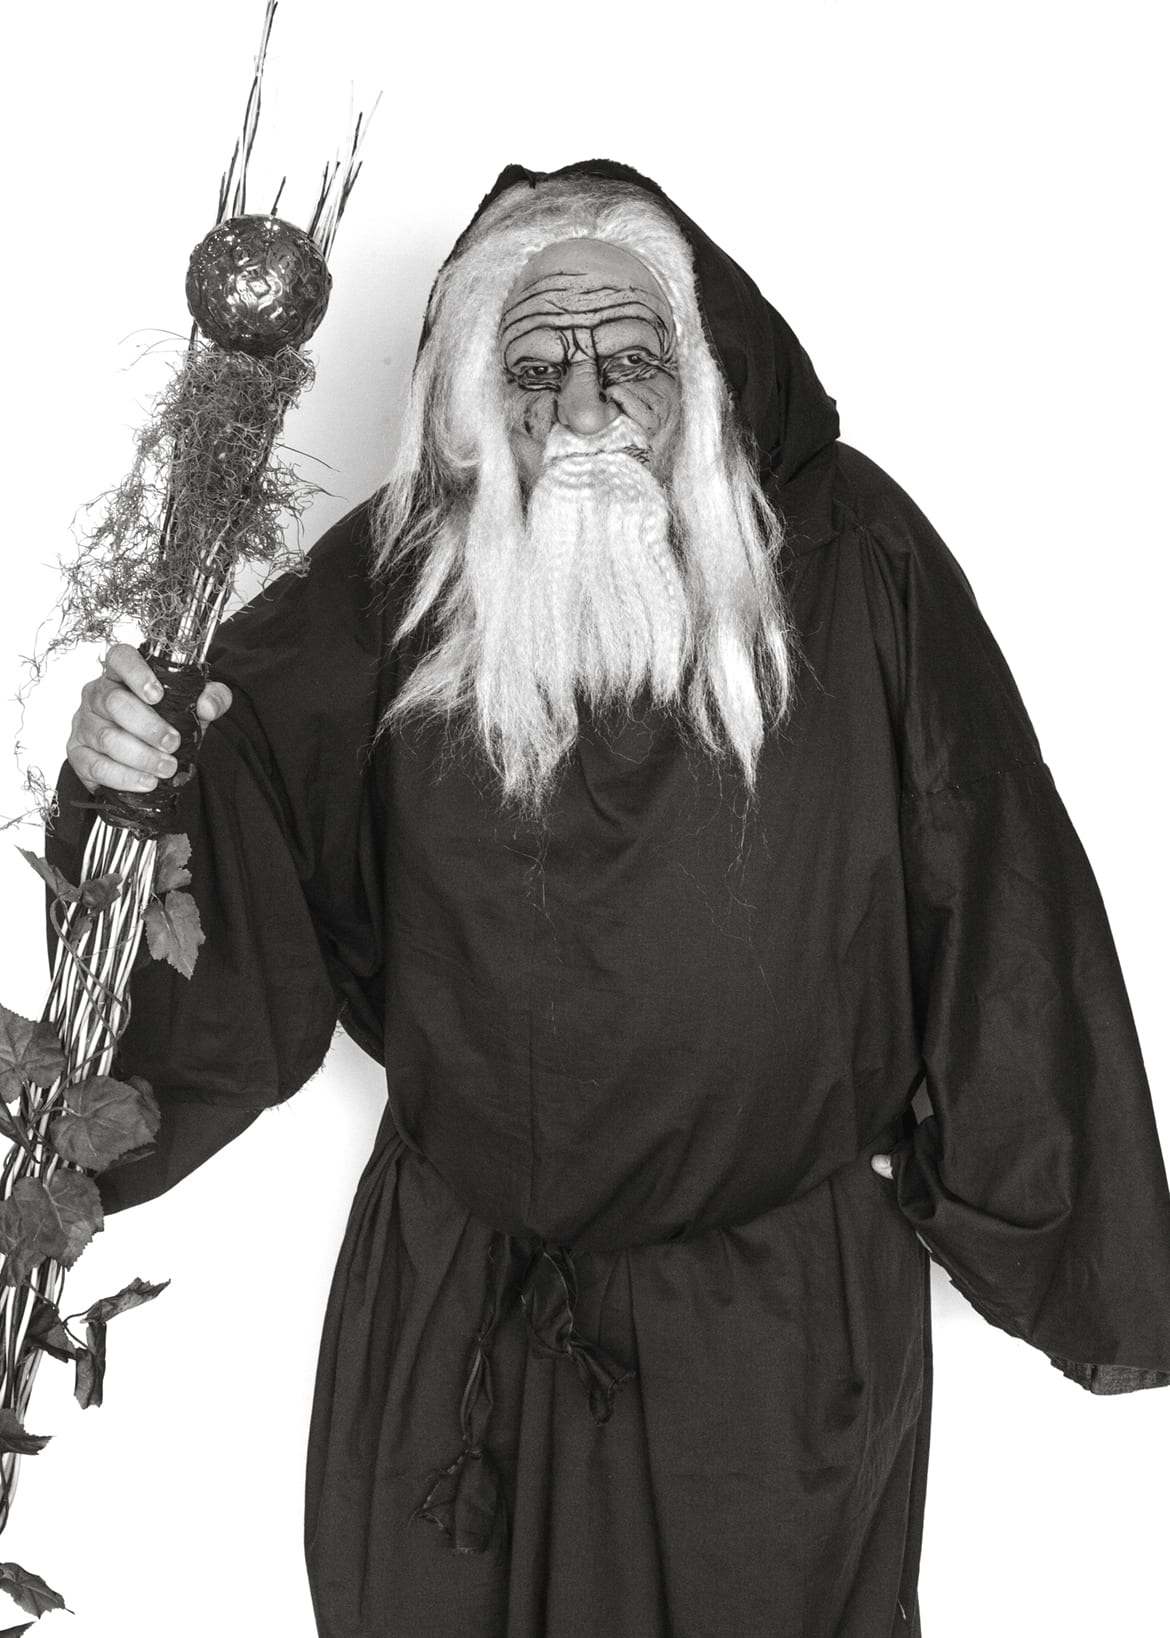 A man dressed as a wizard